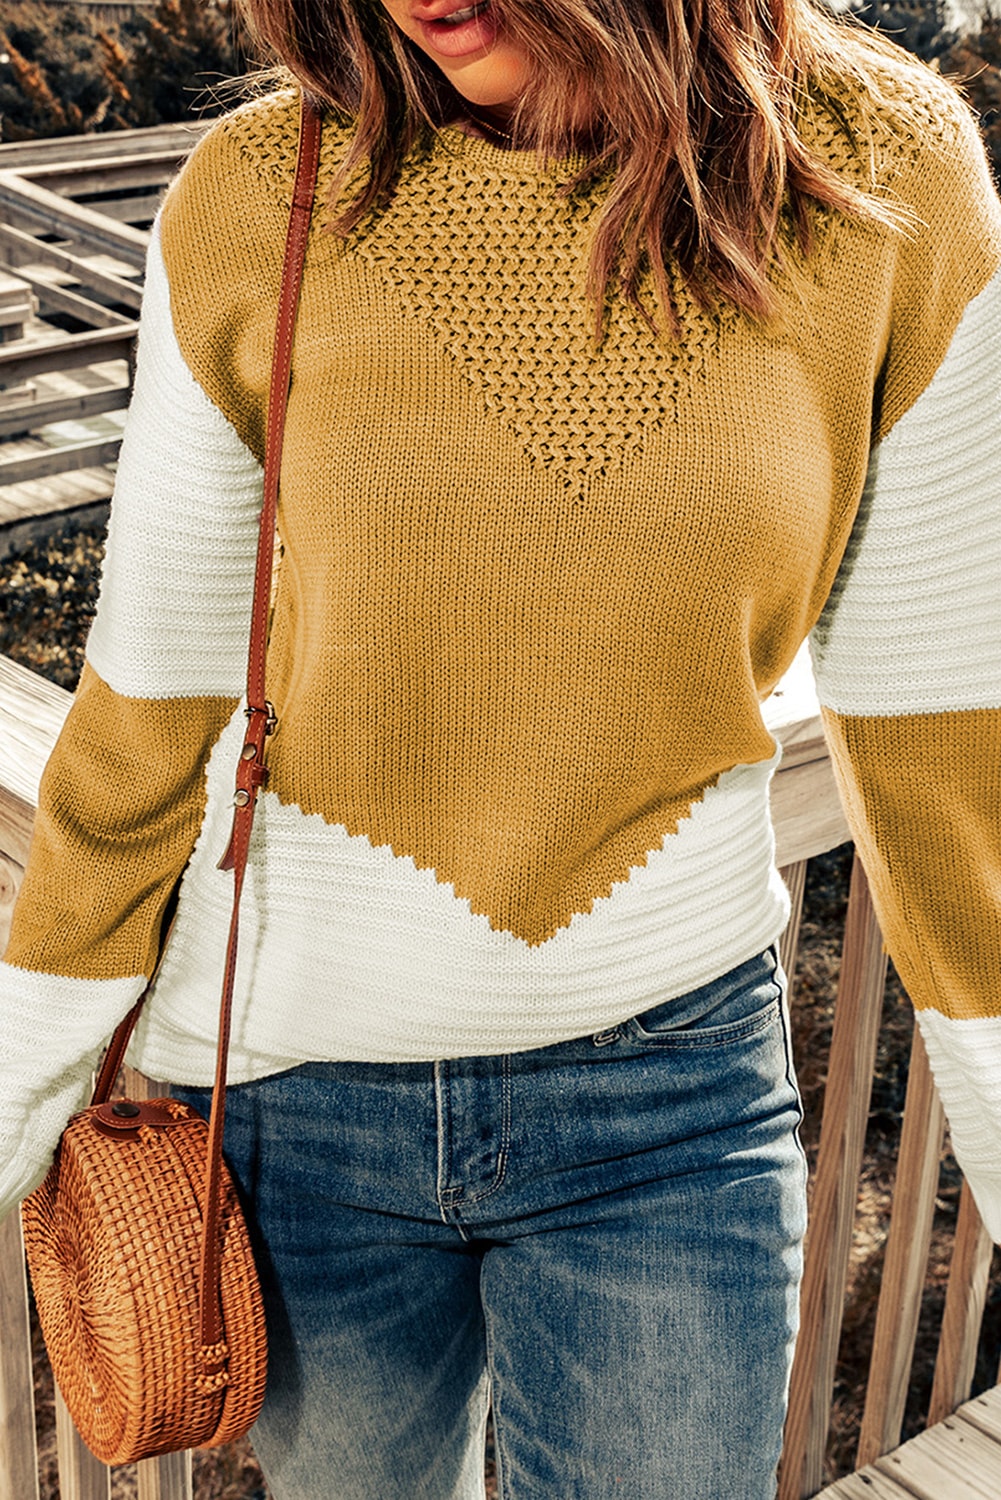 Two-Tone Openwork Rib-Knit Sweater - 3 color options!